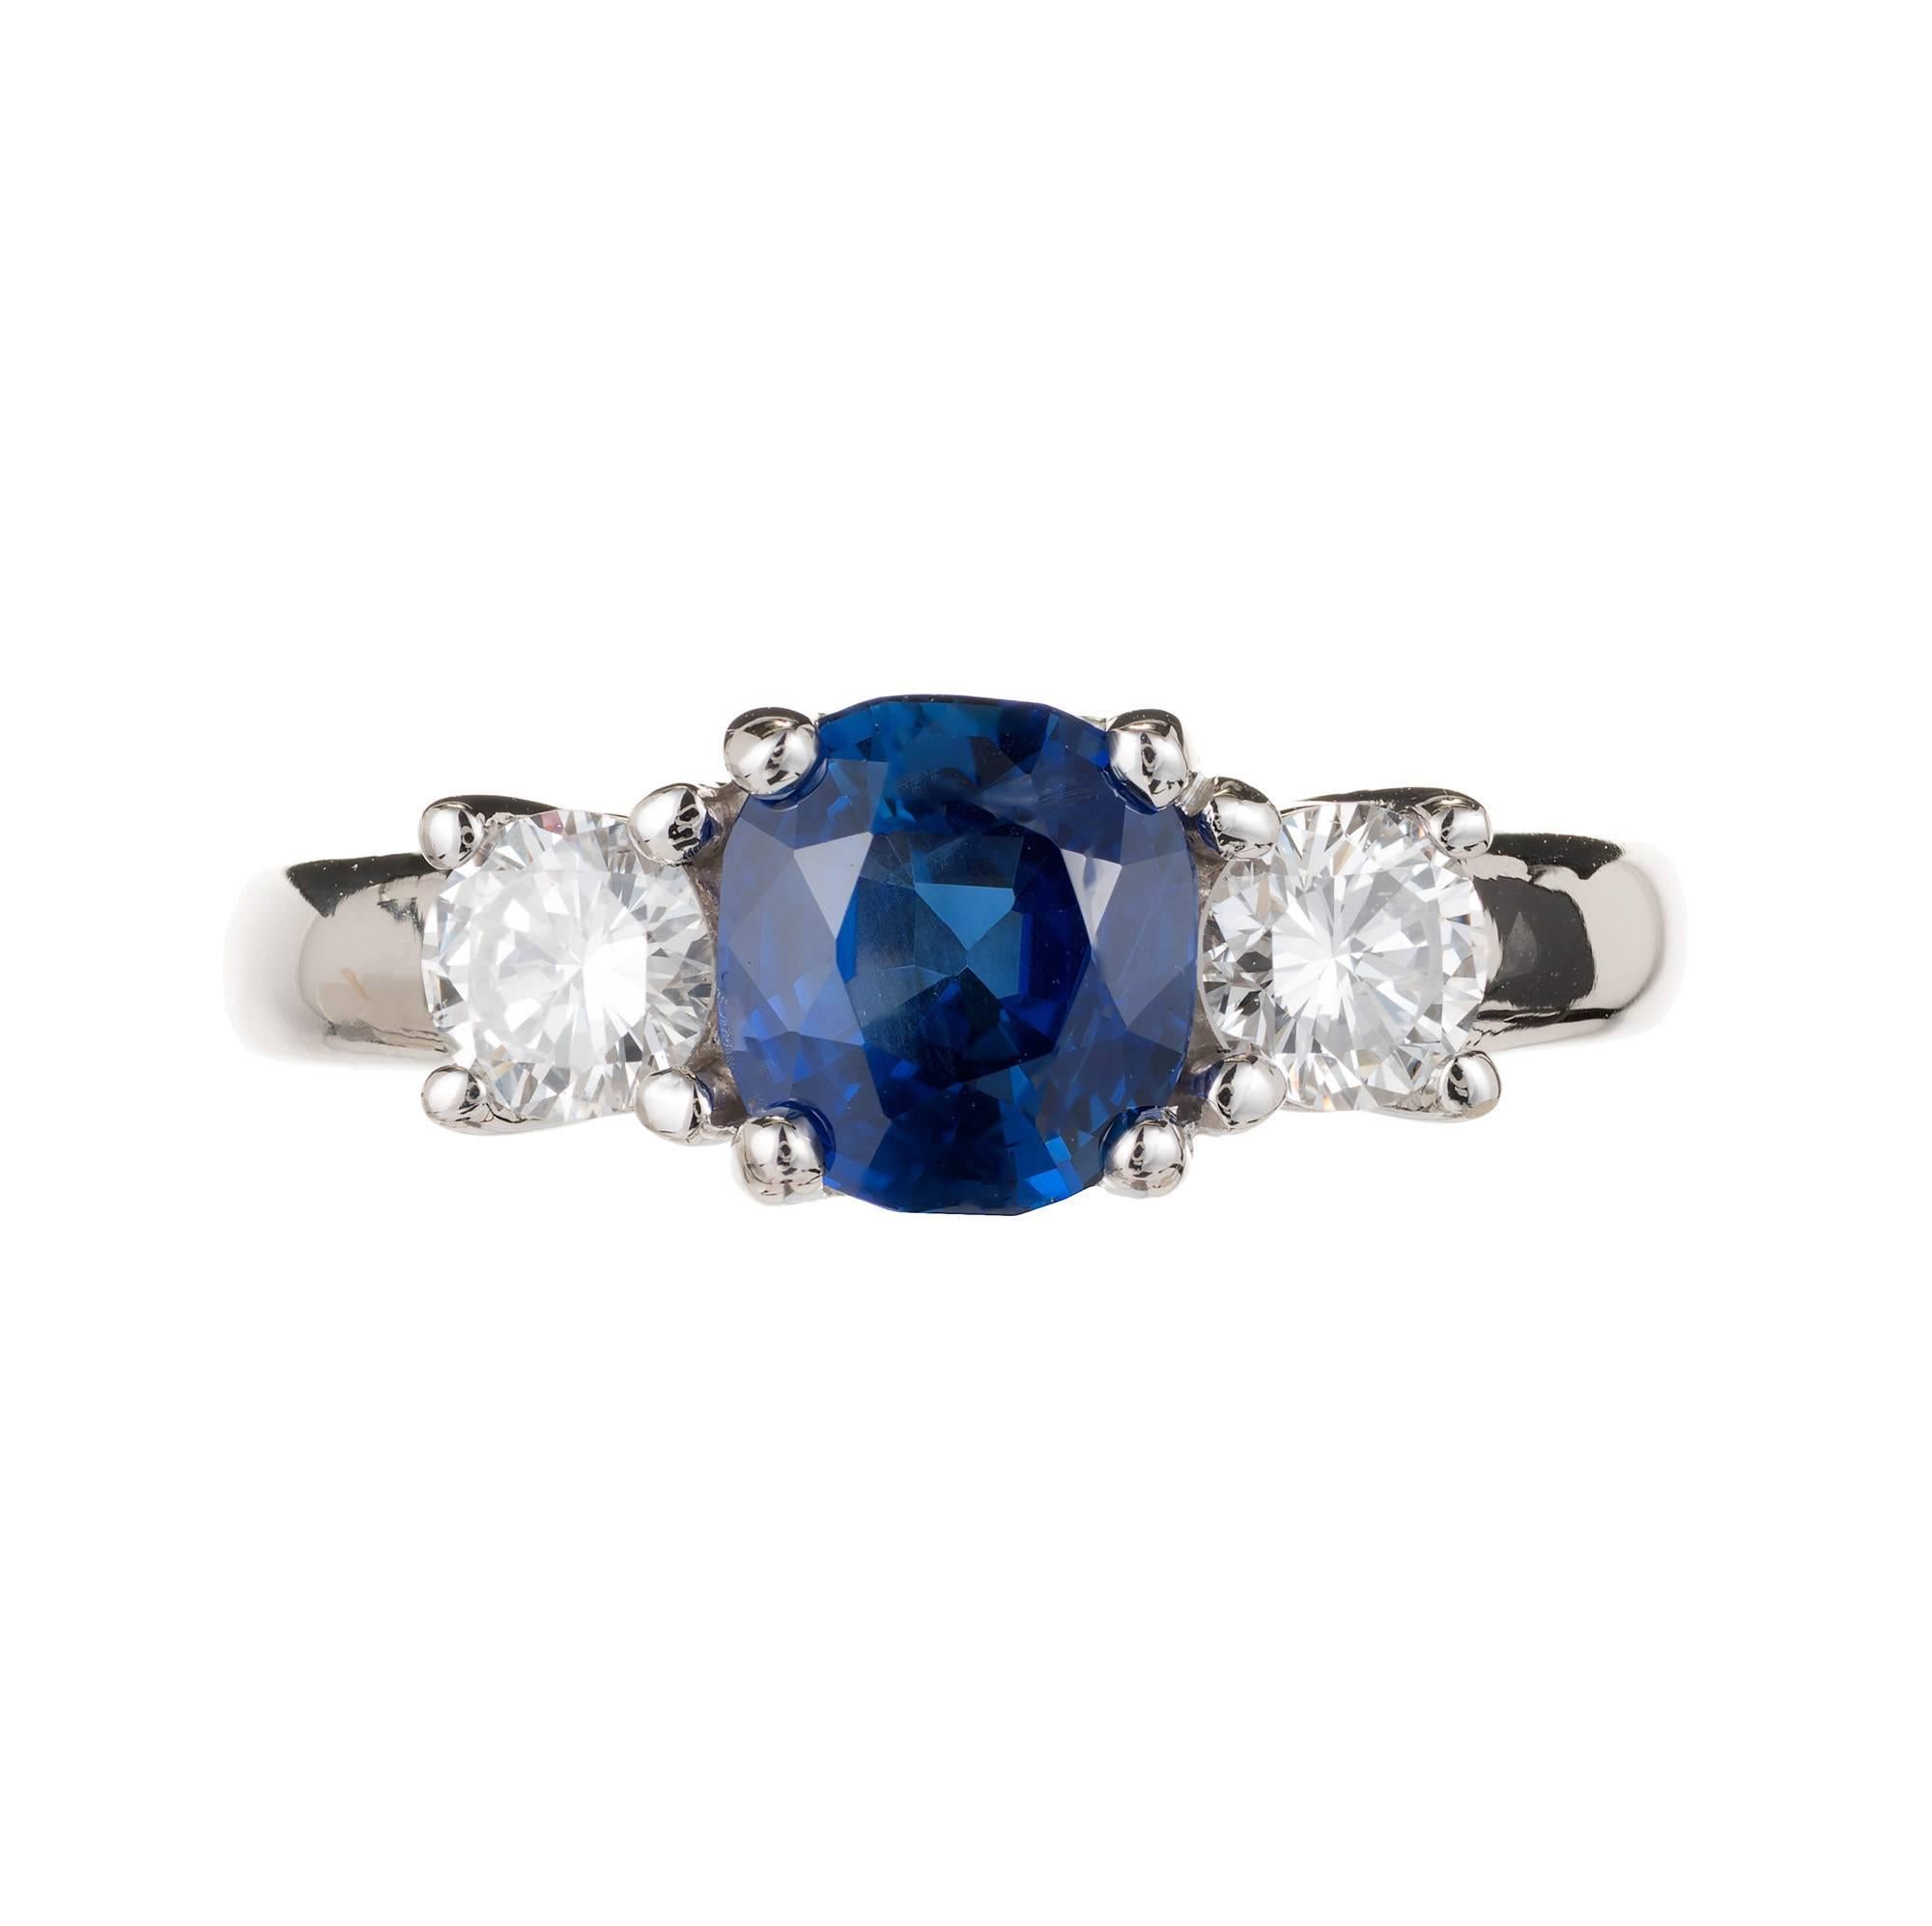 Peter Suchy three-stone sapphire and diamond diamond engagement ring in 14k white gold. GIA Certified natural no heat cushion sapphire 1.93 carats.

1 cushion bright blue no heat sapphire approximate 1.93 carats. GIA Certified 6183684776
2 round